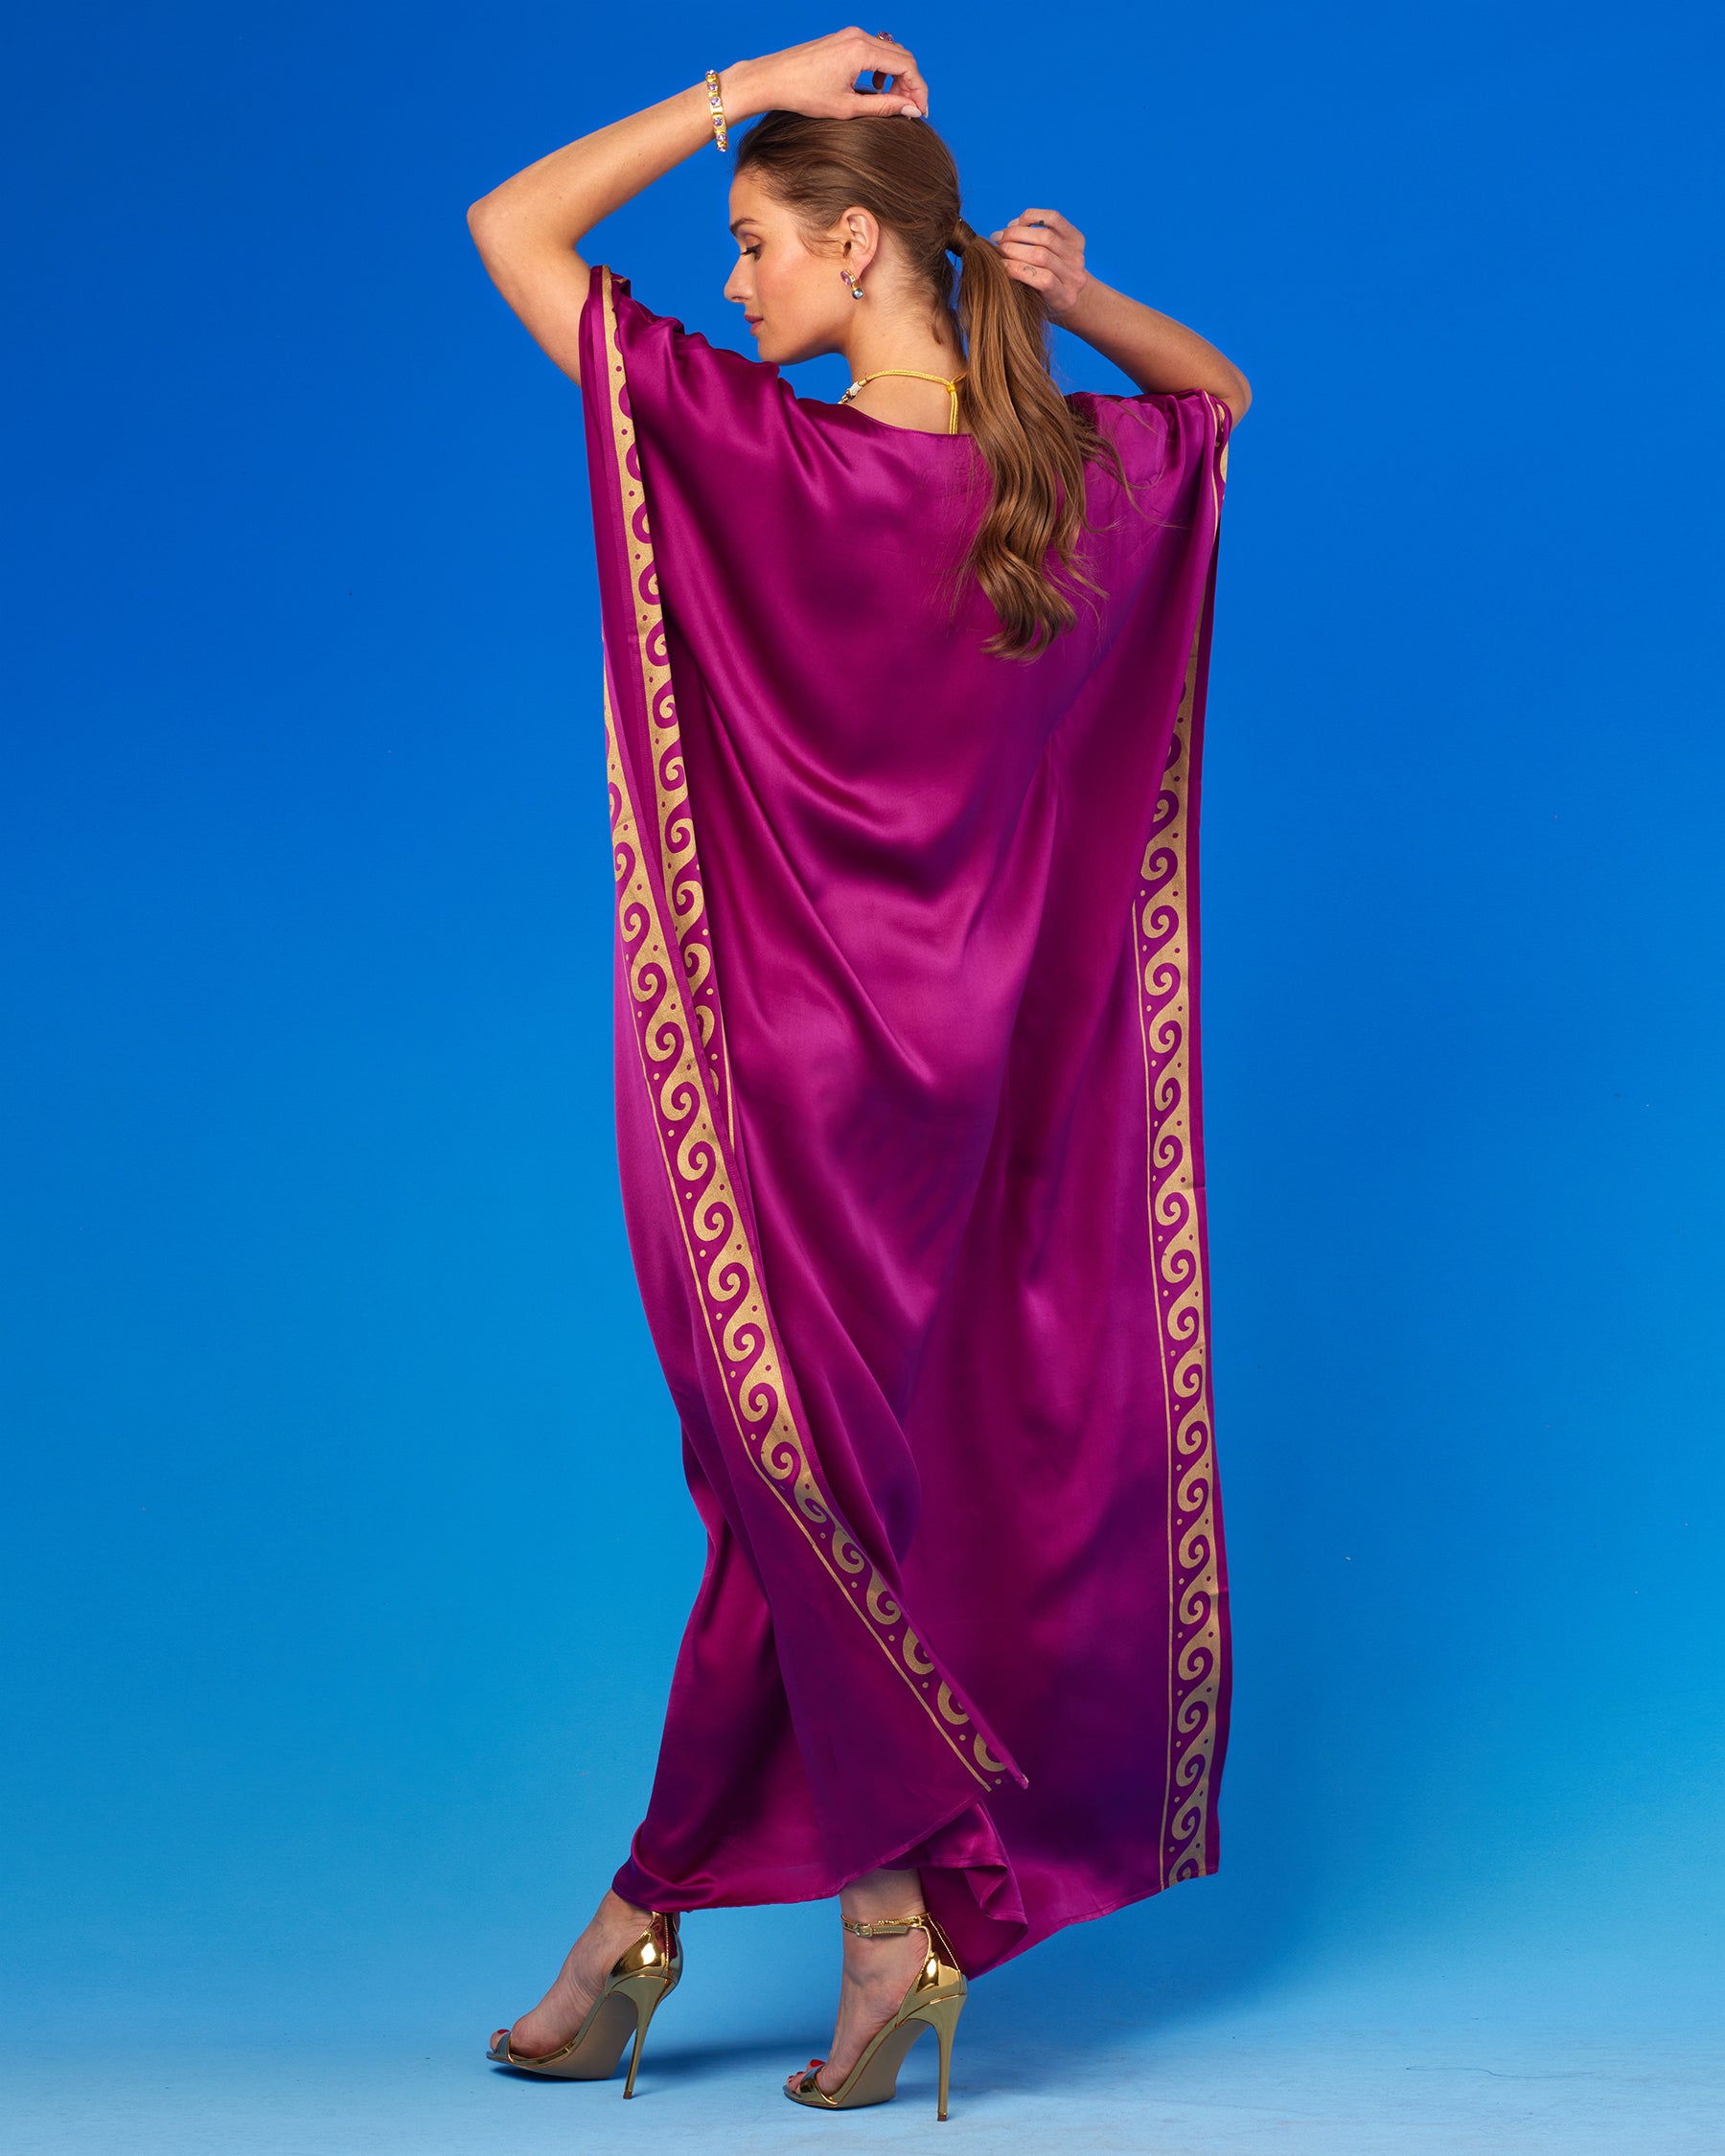 Minerva Silk Kaftan in Tyrian Purple and Gold-Back View with Arms Up